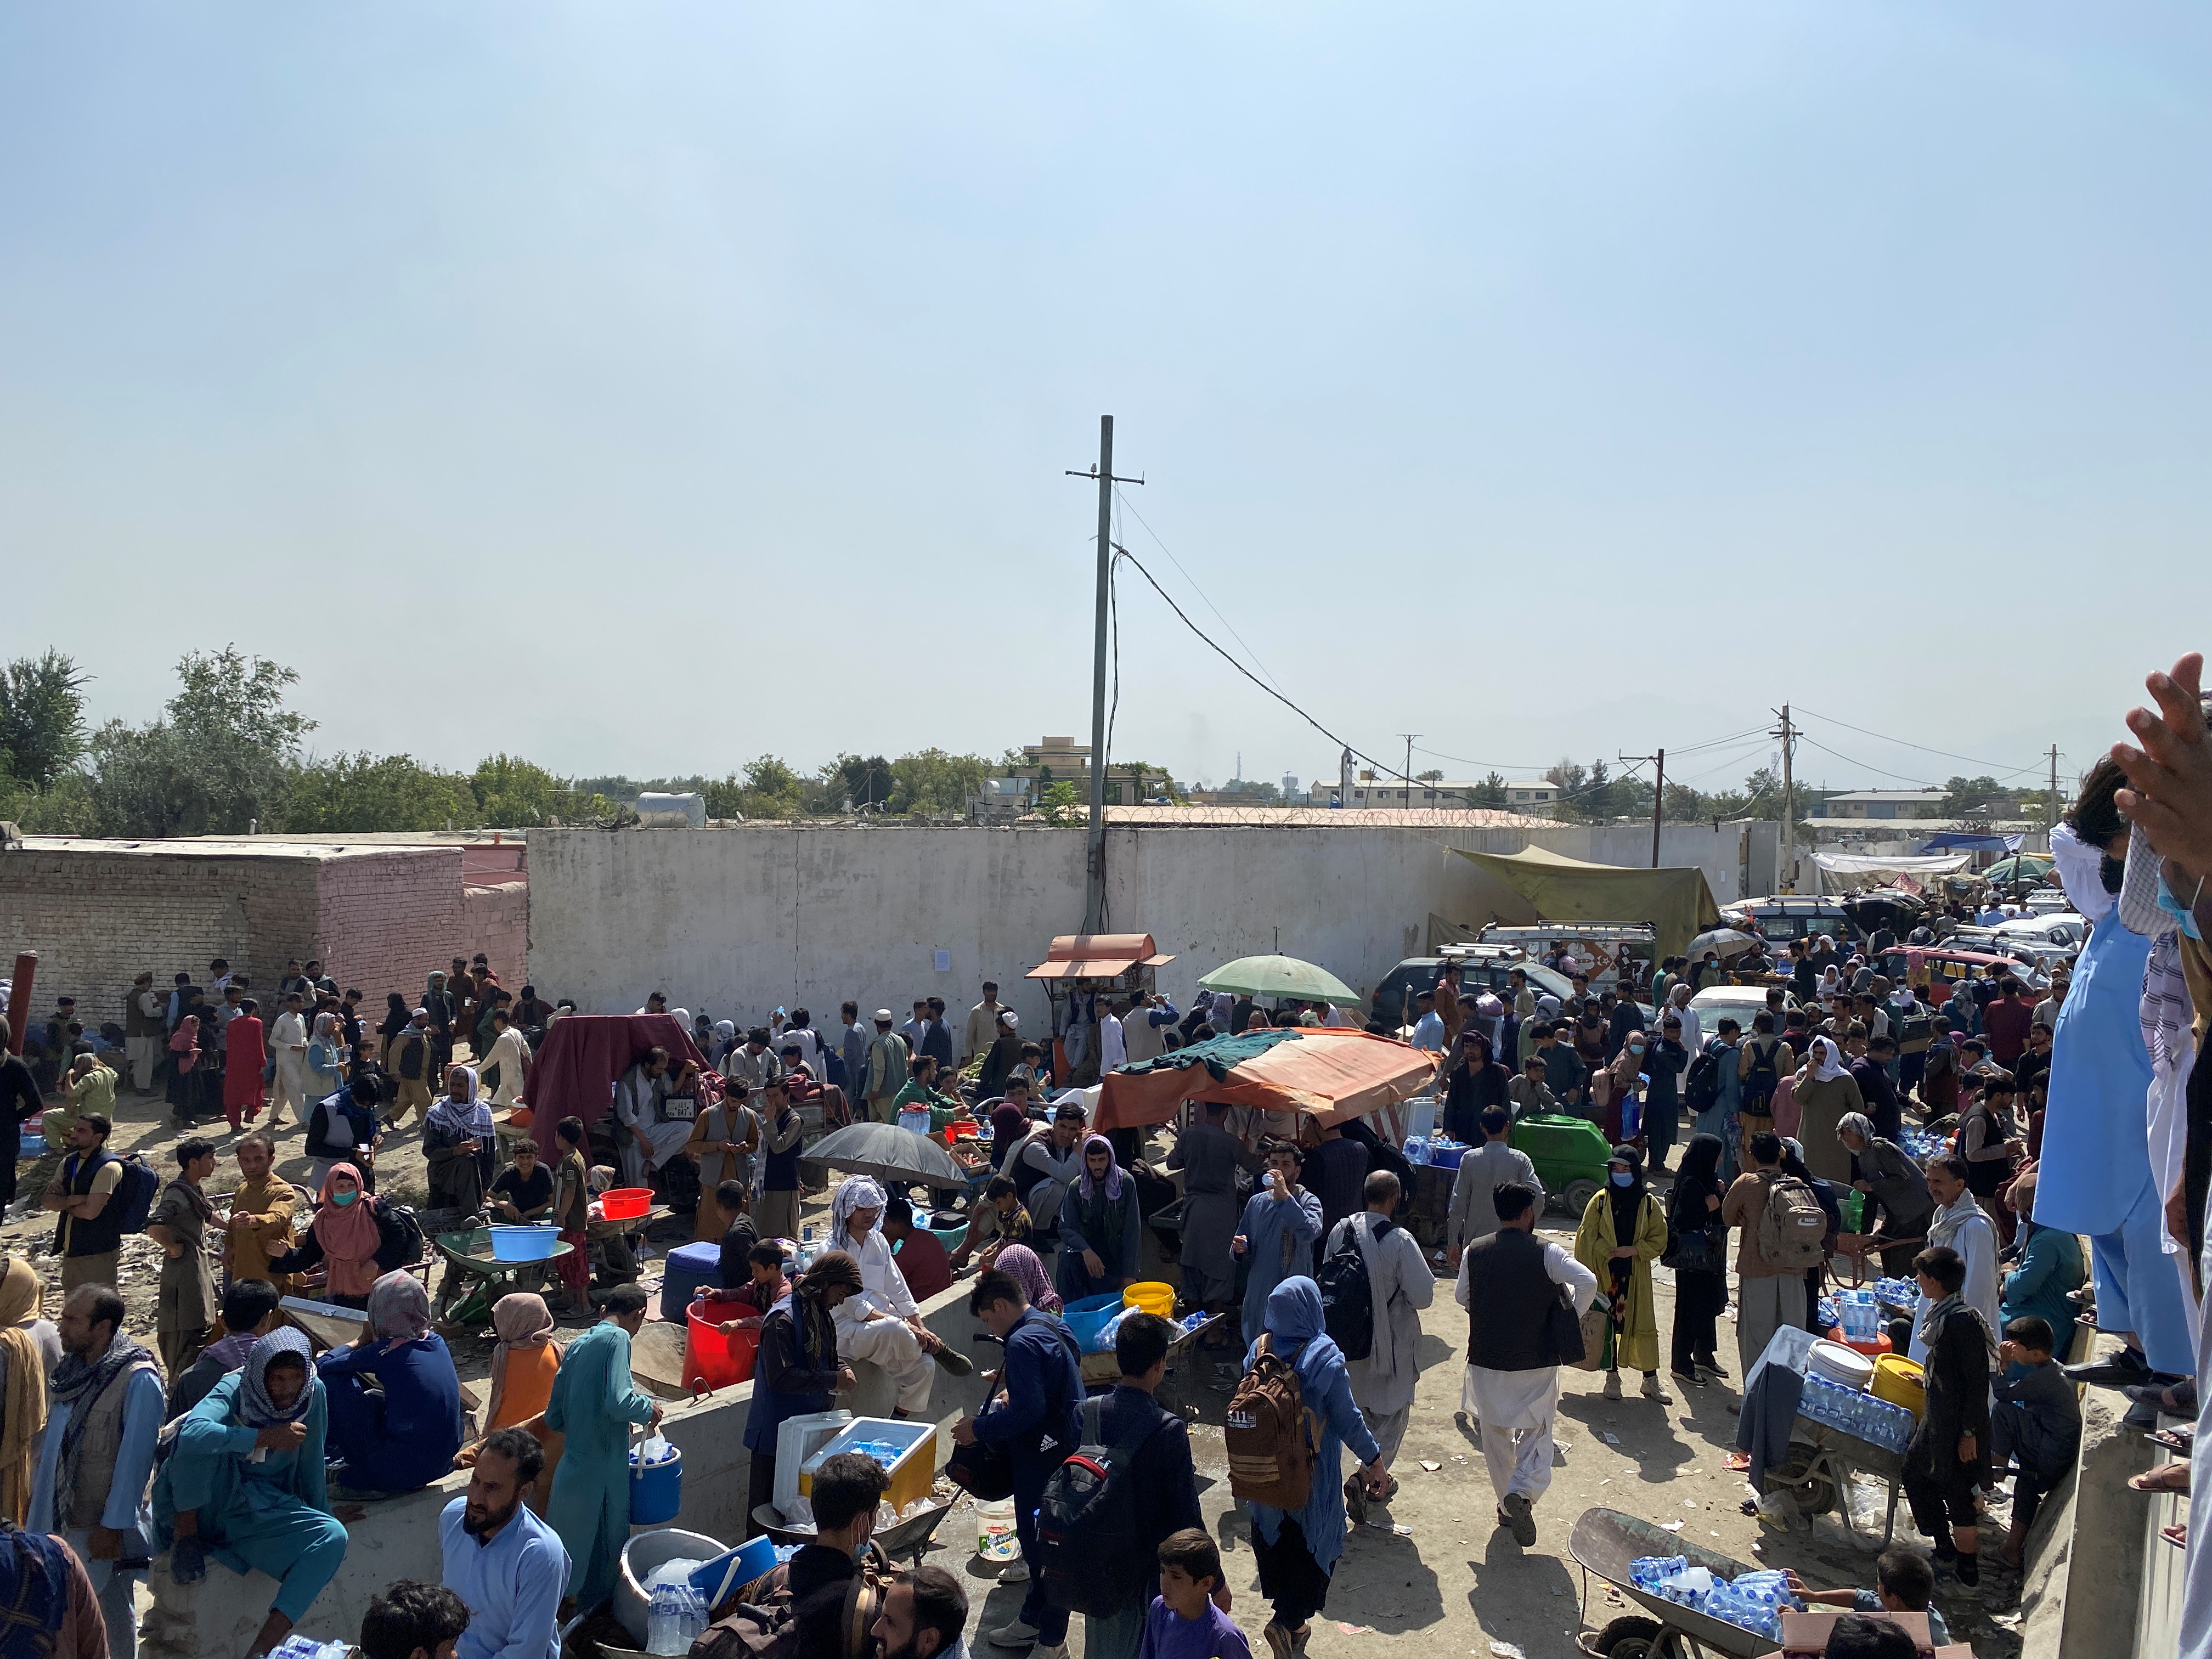 Crowds outside the airport in Kabul